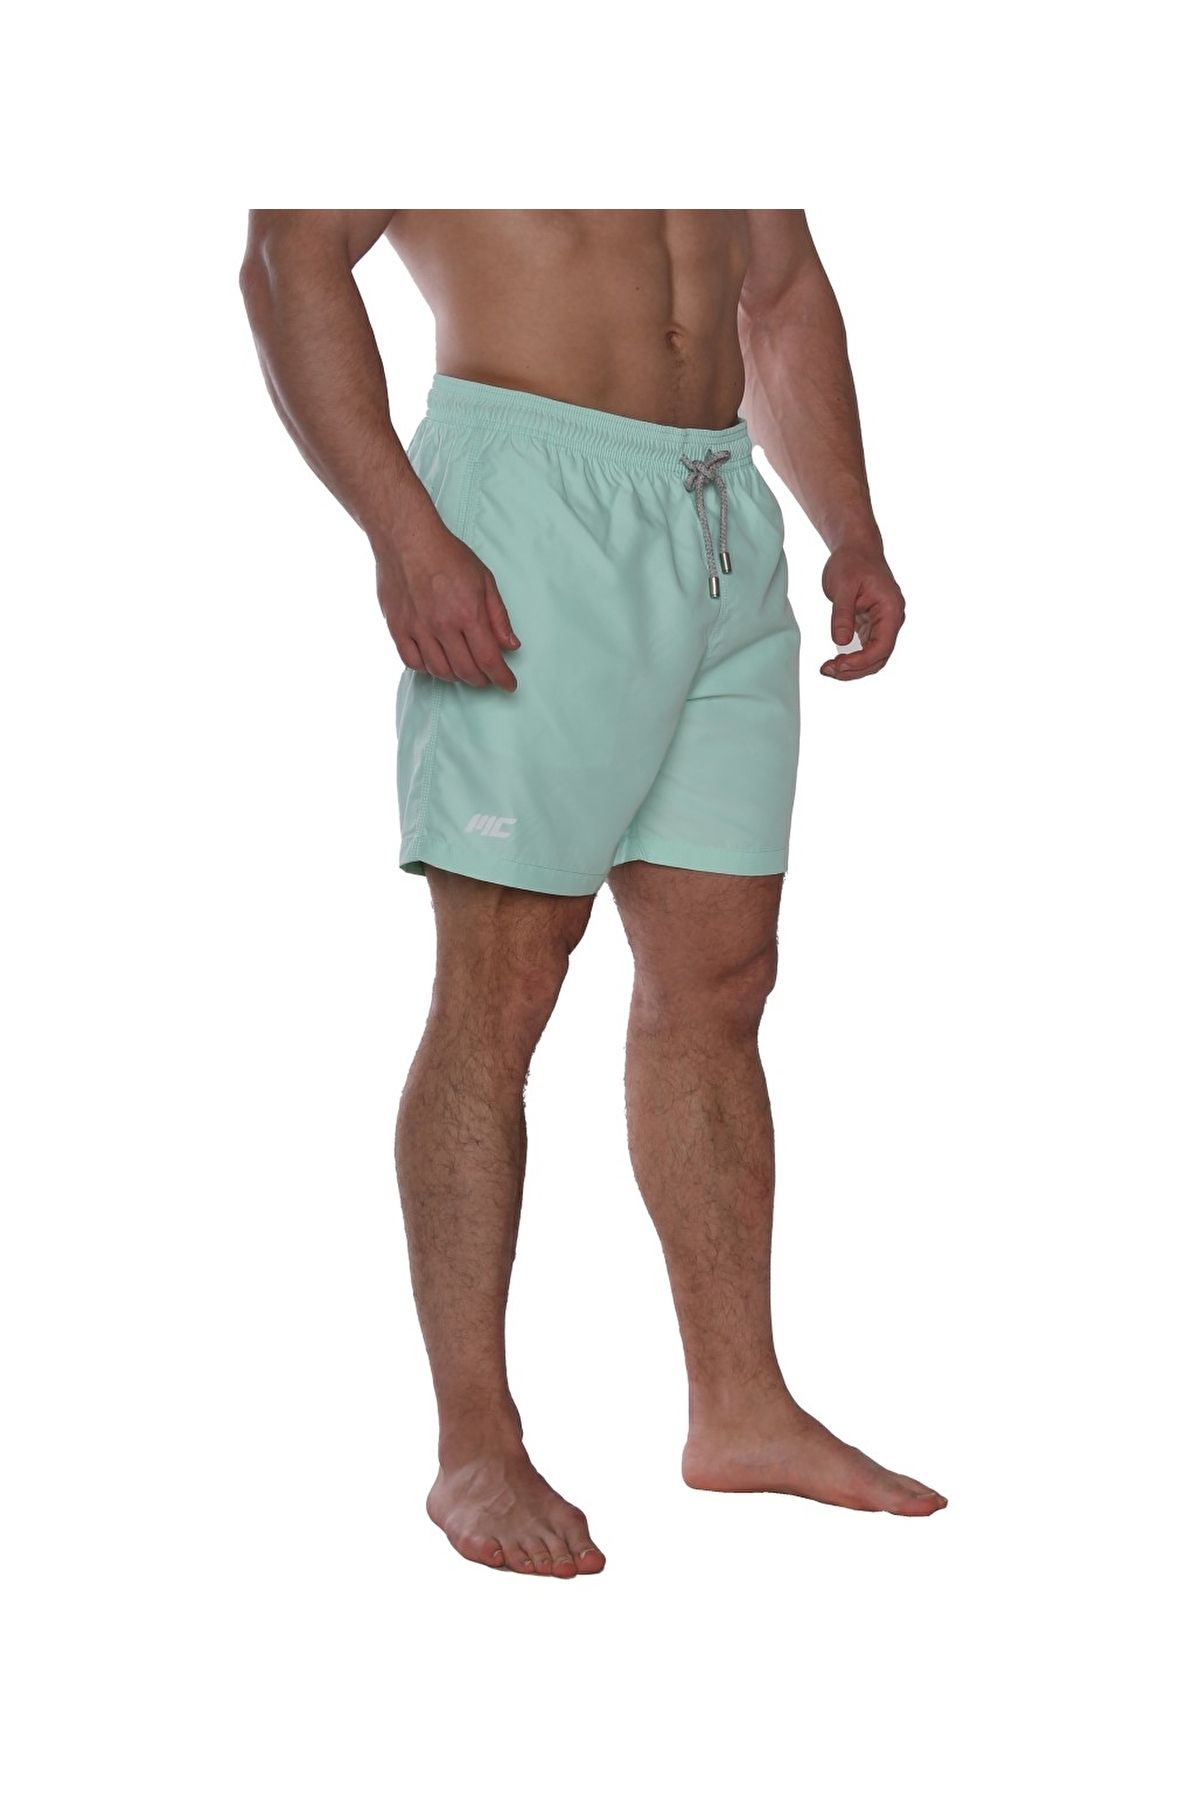 MUSCLECLOTH Quick Dry Şort Mayo Mint